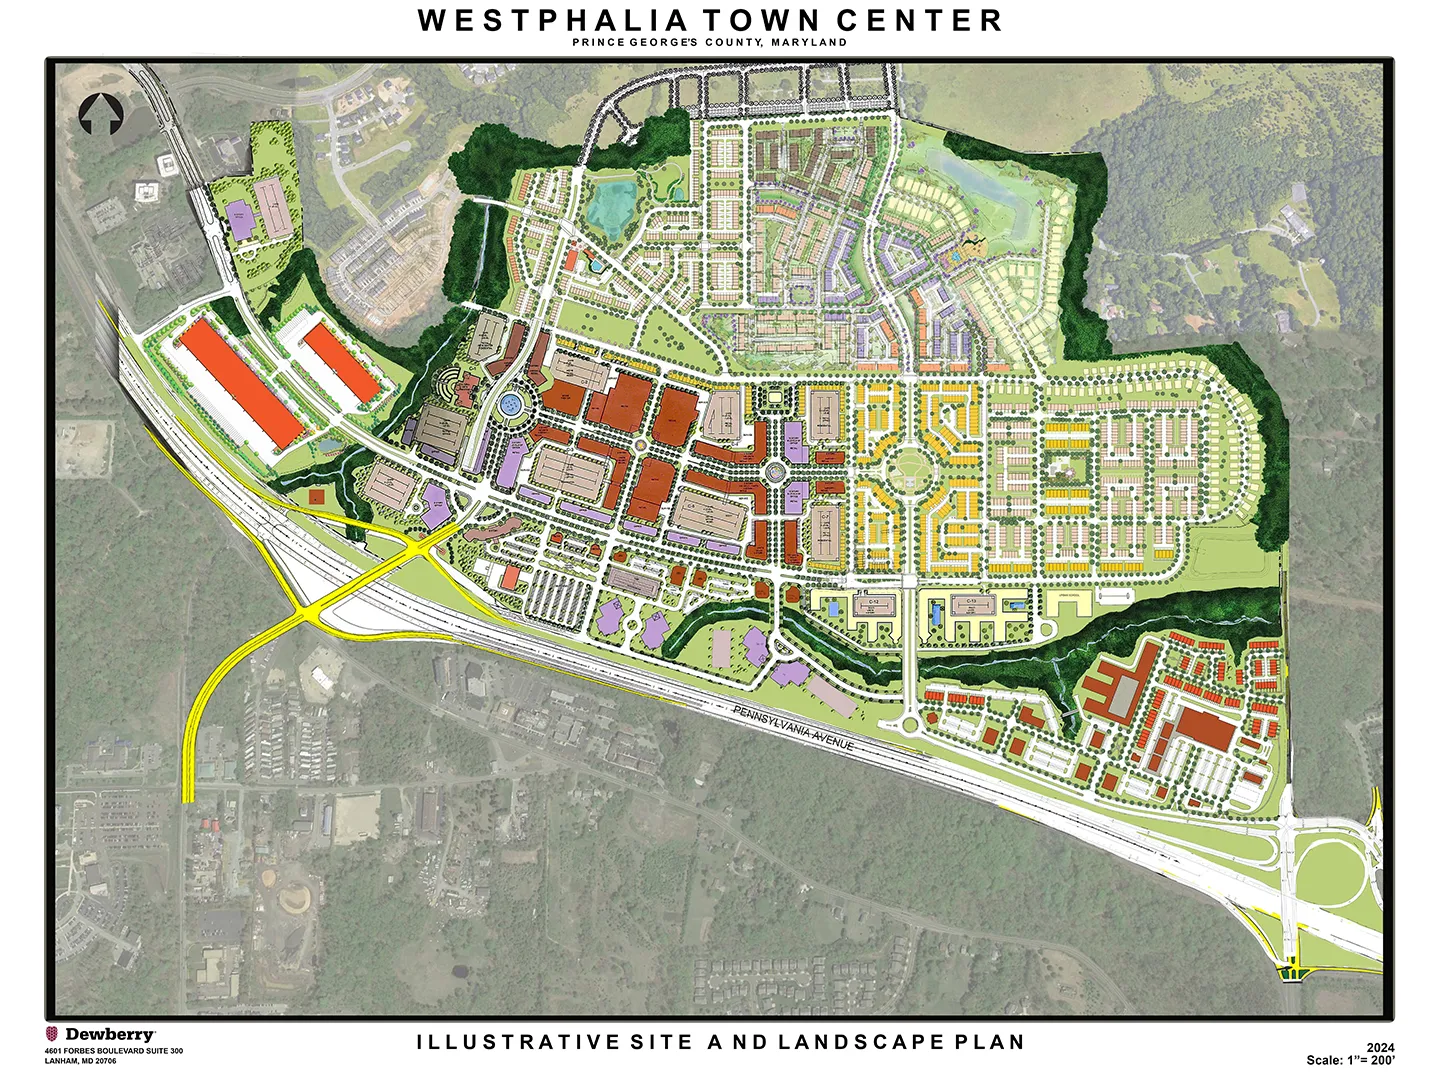 An illustrative site and landscape plan for the Westphalia Town Center.